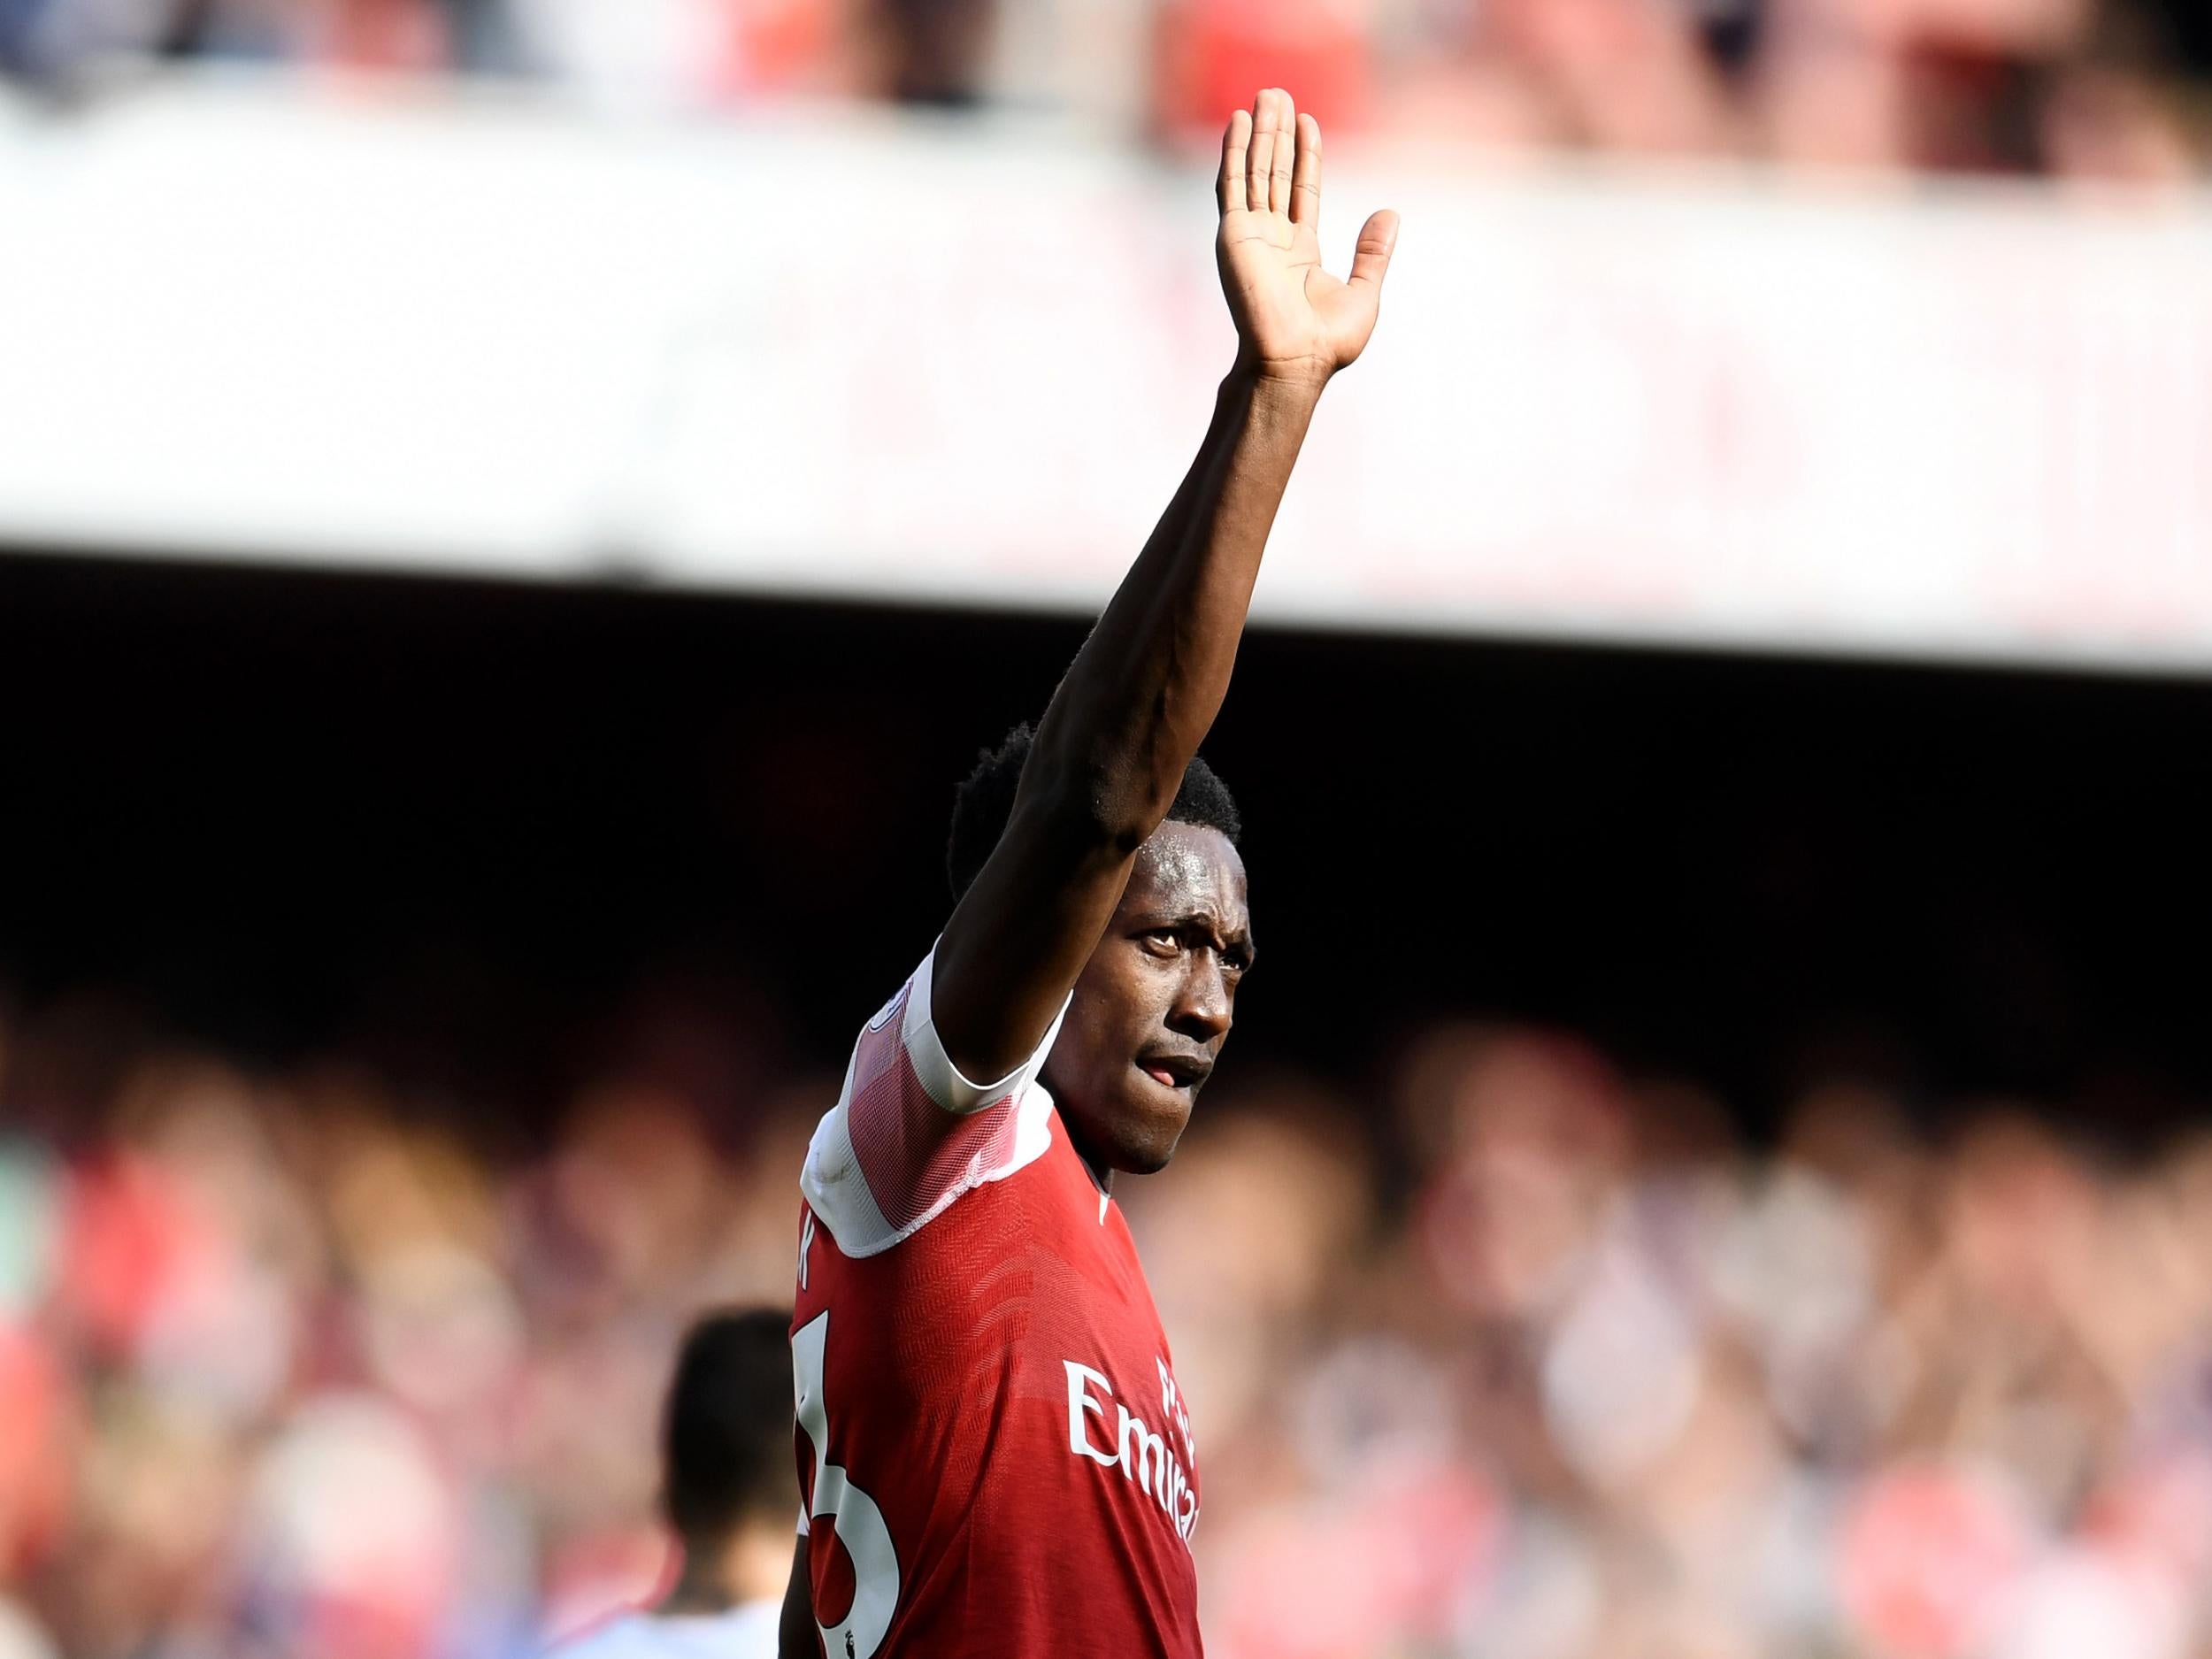 Welbeck wrapped things up for the Gunners